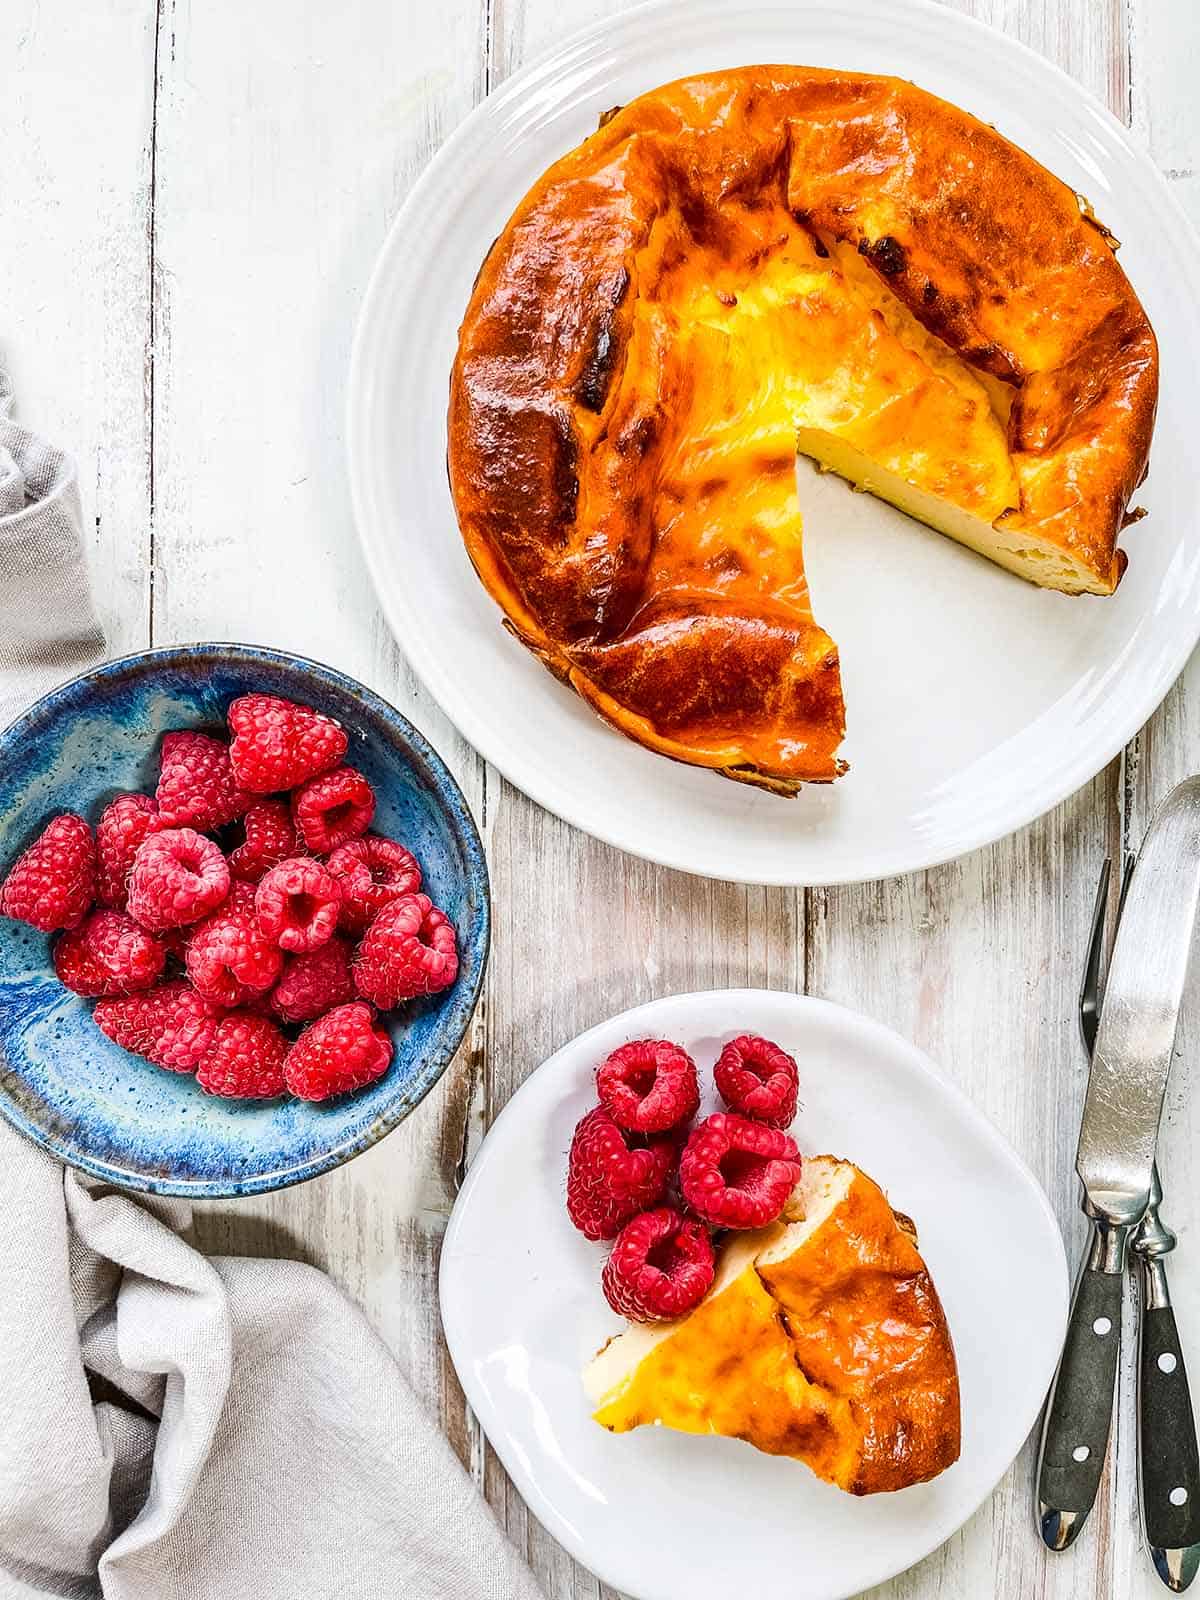 A tart on a white table with a bowl of raspberries.